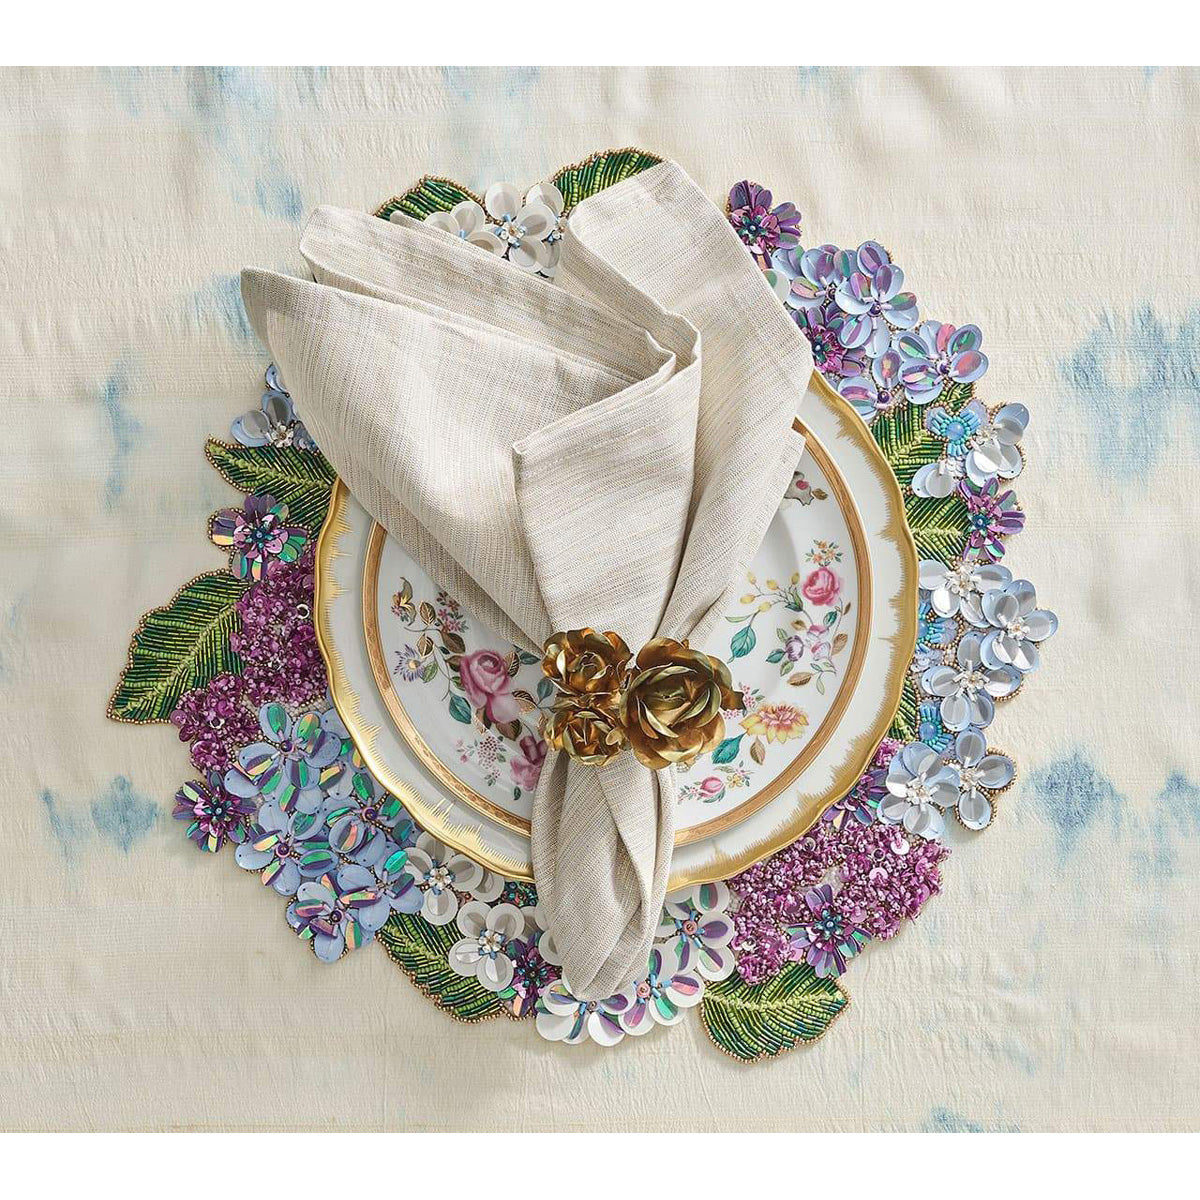 Hydrangea Placemat in Multi - Set of 2 by Kim Seybert Additional Image-5